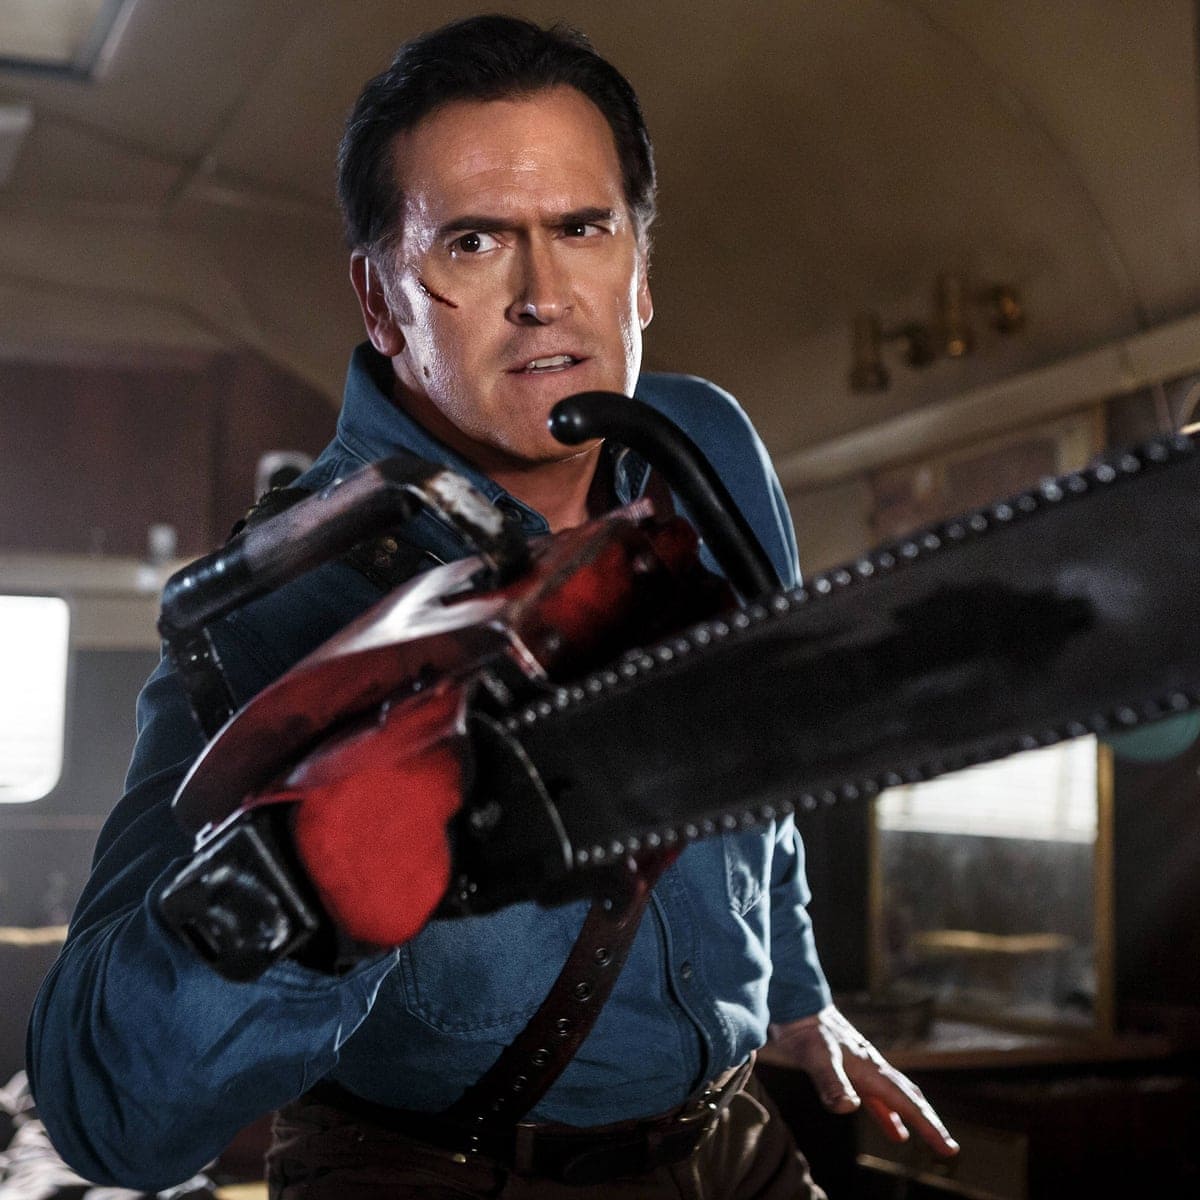 Ash Williams: A Popular Horror Movie Character